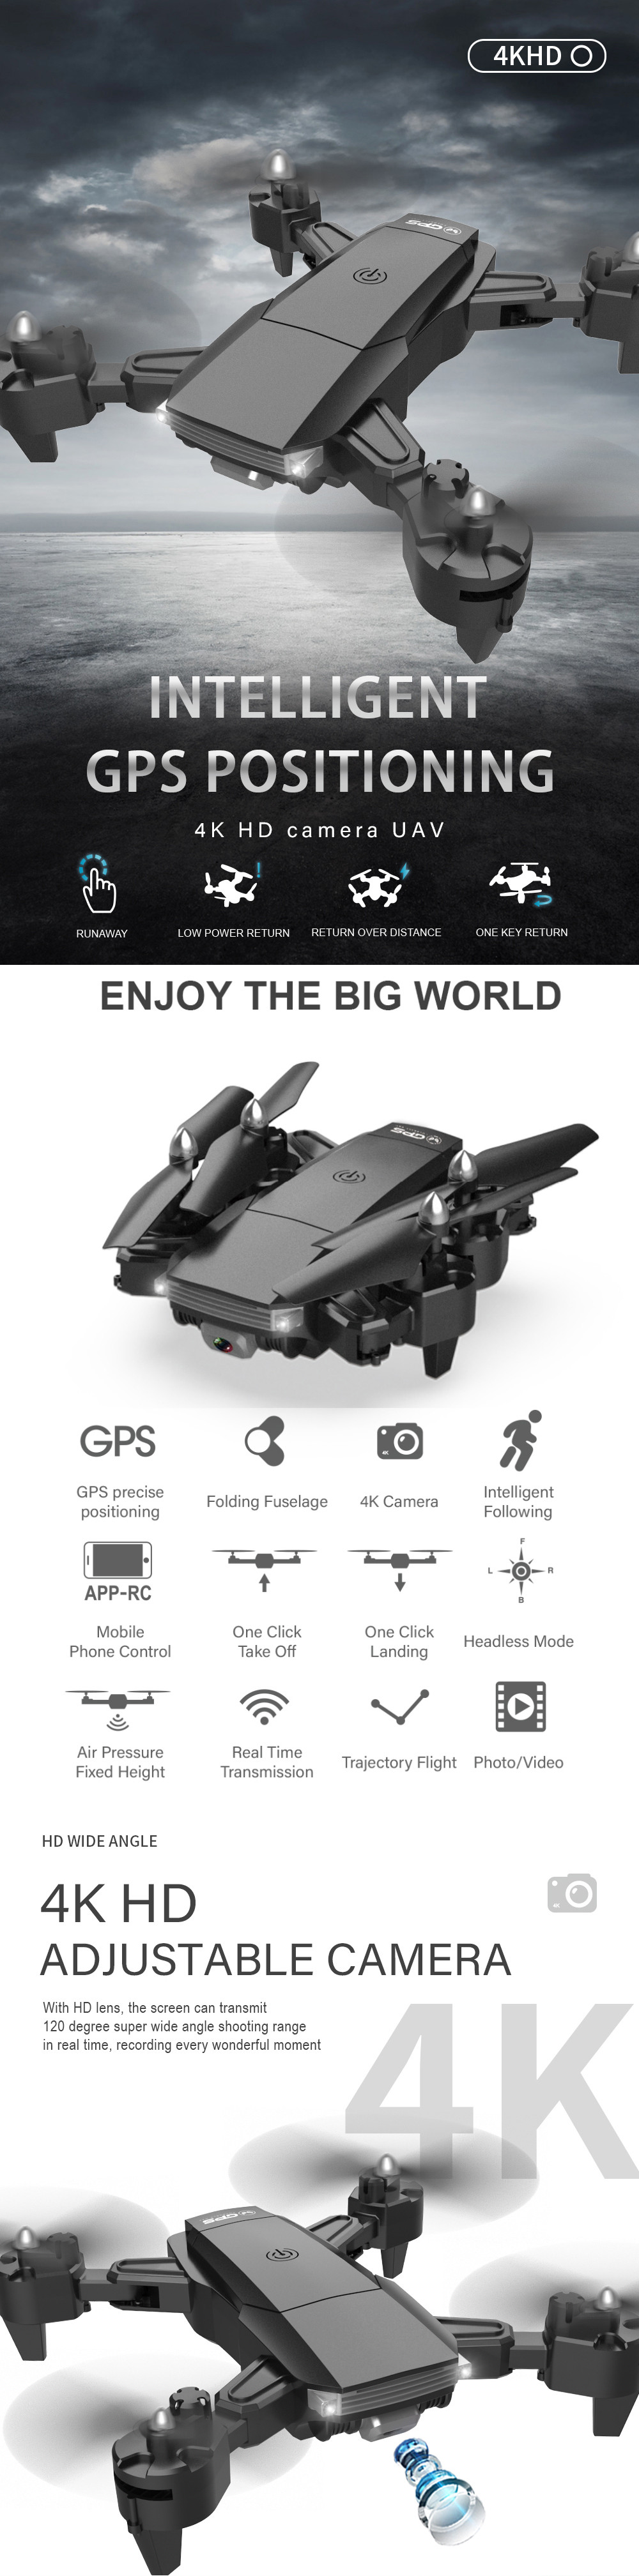 DH600S-GPS-5G-WiFi-FPV-With-4K-HD-Camera-20mins-Flight-Time-Follow-Me-Mode-Foldable-RC-Quadcopter-Dr-1880209-1